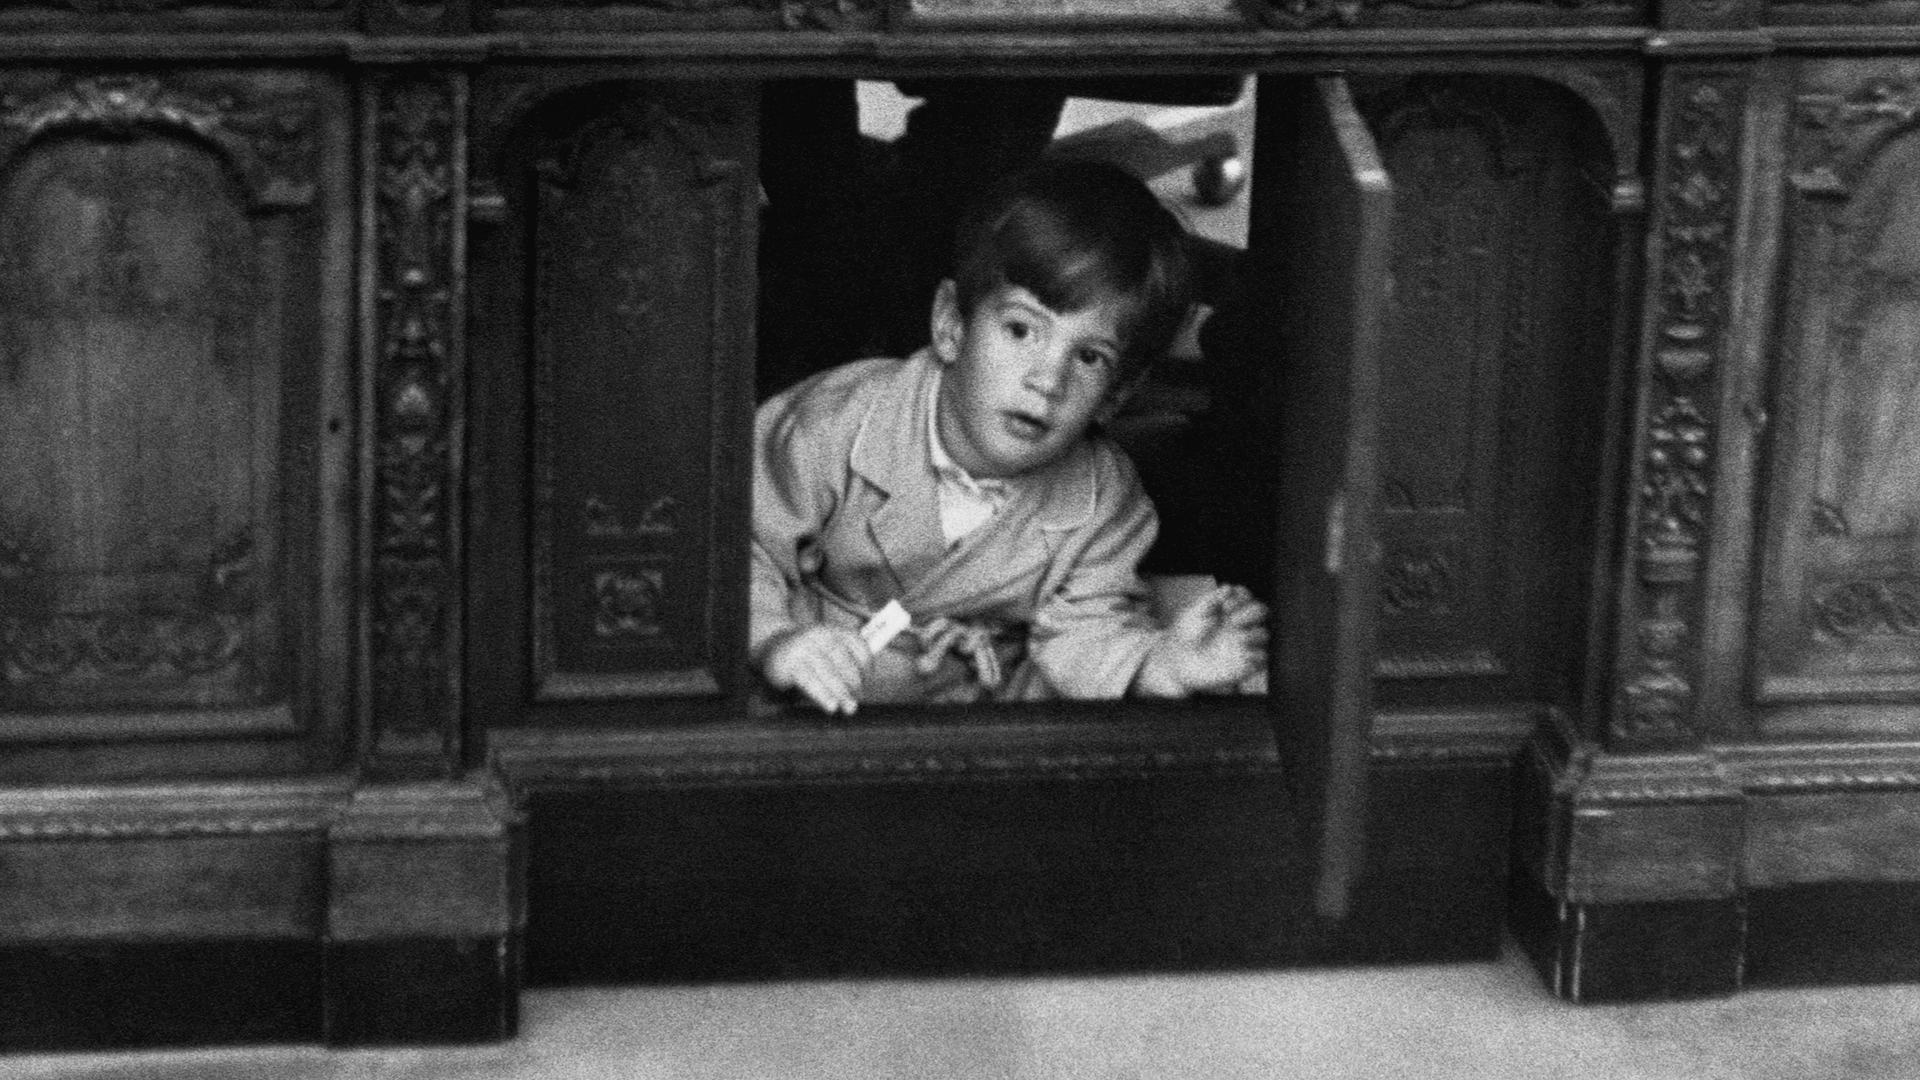  John F. Kennedy Jr.'s Remarkable Life in Photos